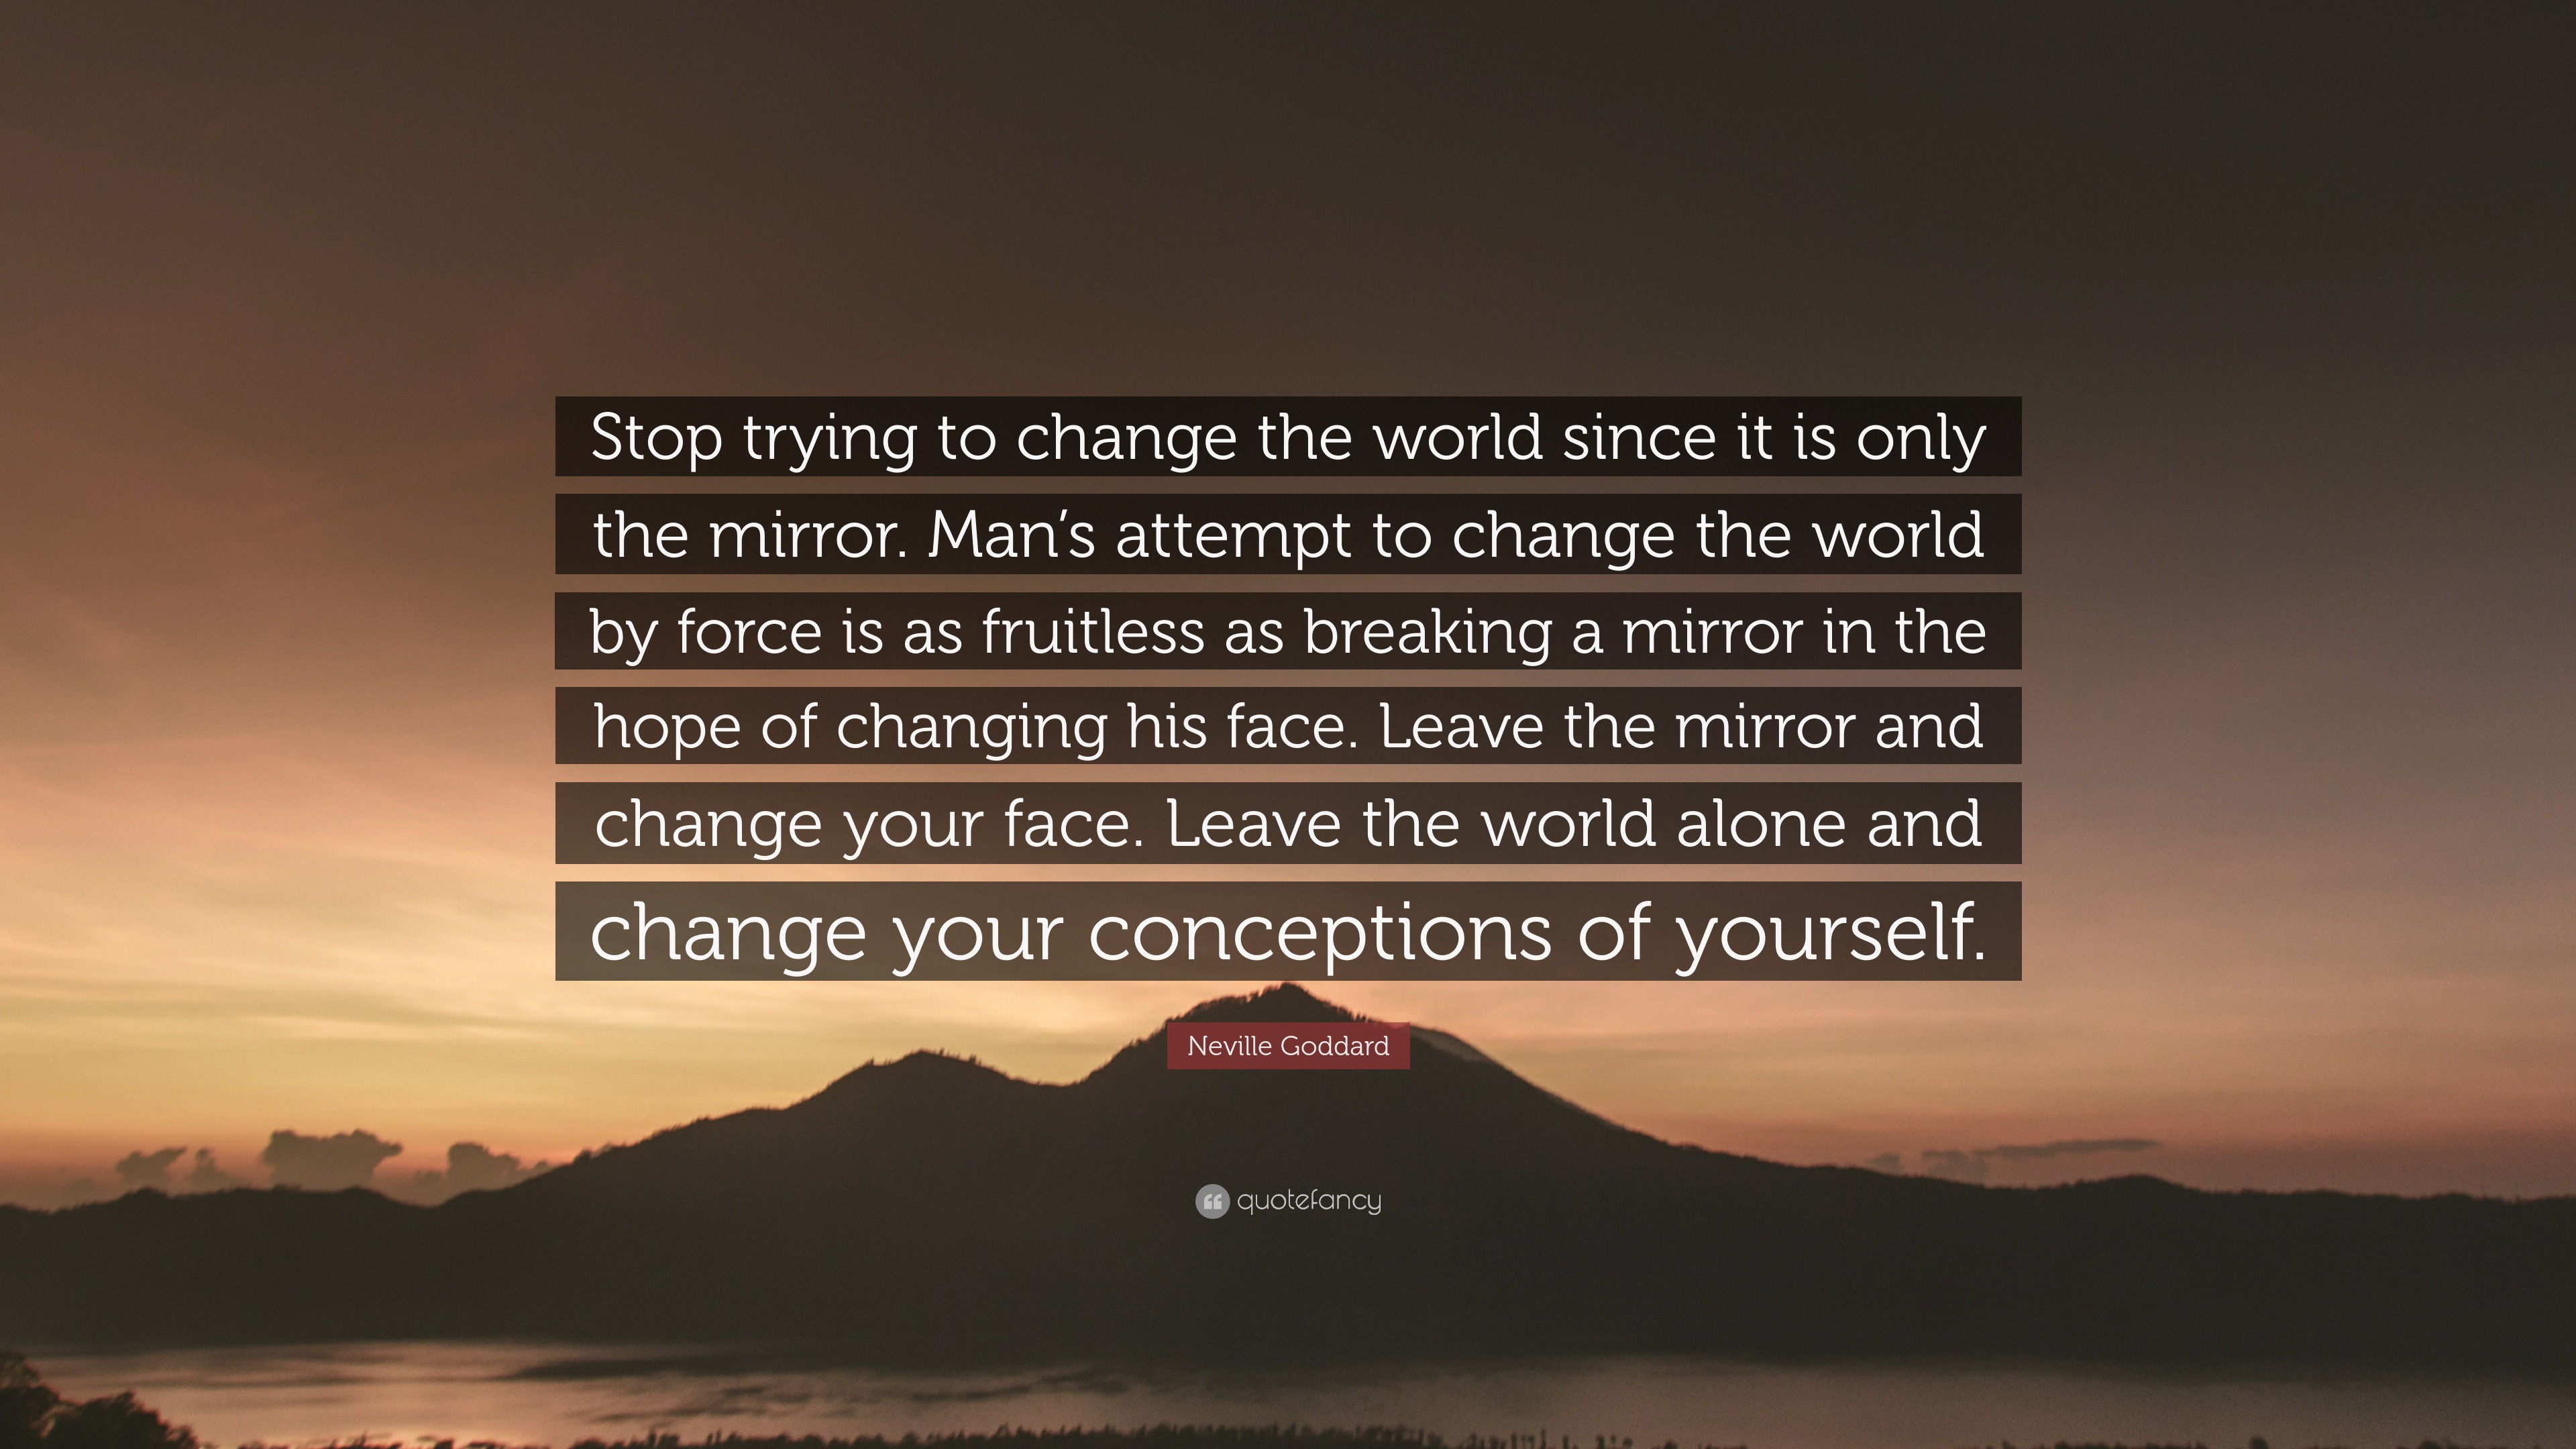 Neville Goddard Quote: “Stop trying to change the world since it is only  the mirror. Man's attempt to change the world by force is as fruitless ...”